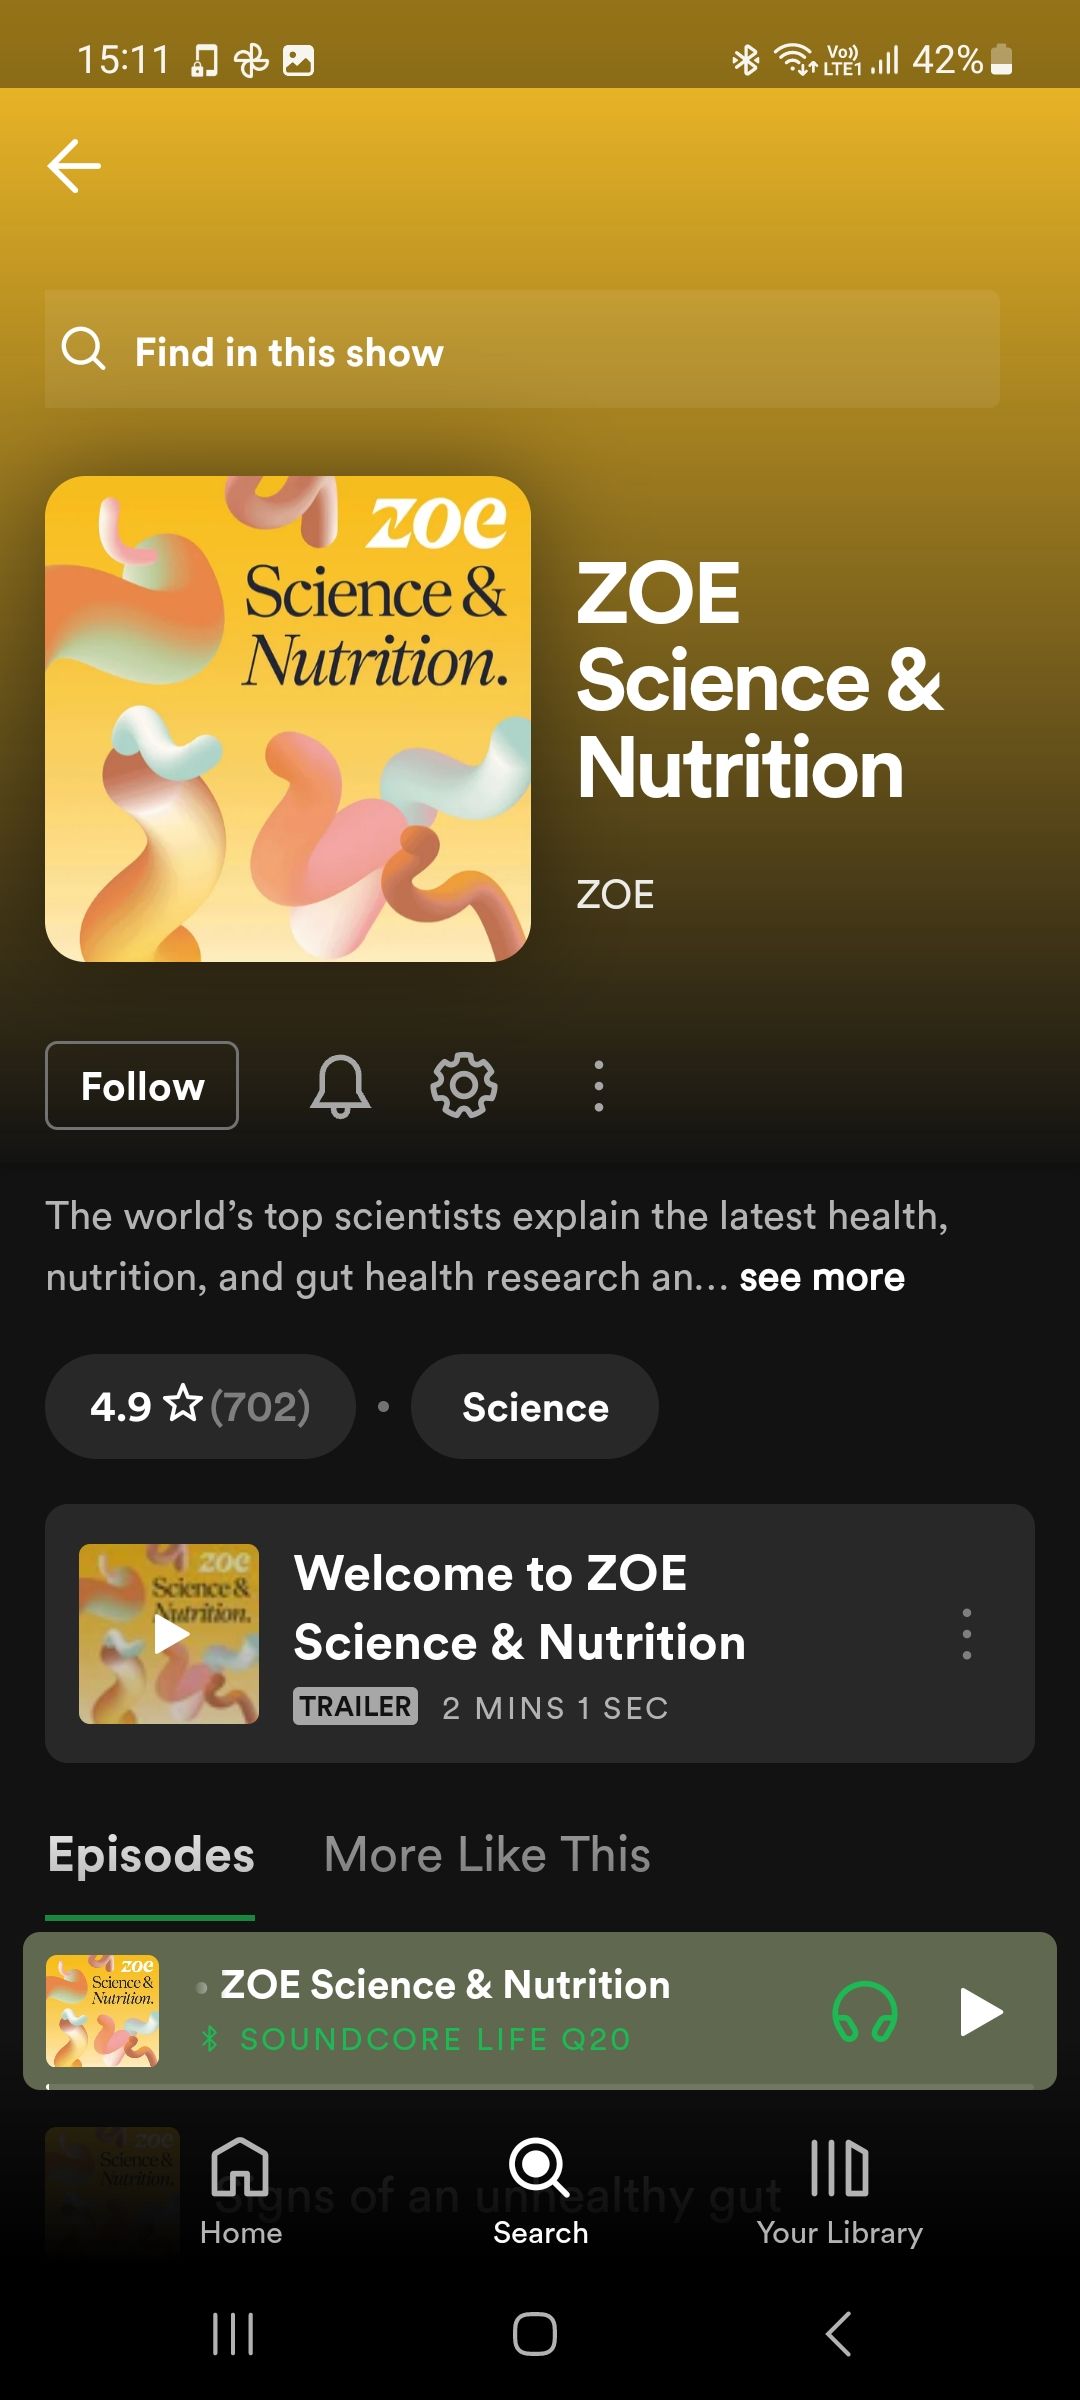 ZOE Science & Nutrition podcast homepage